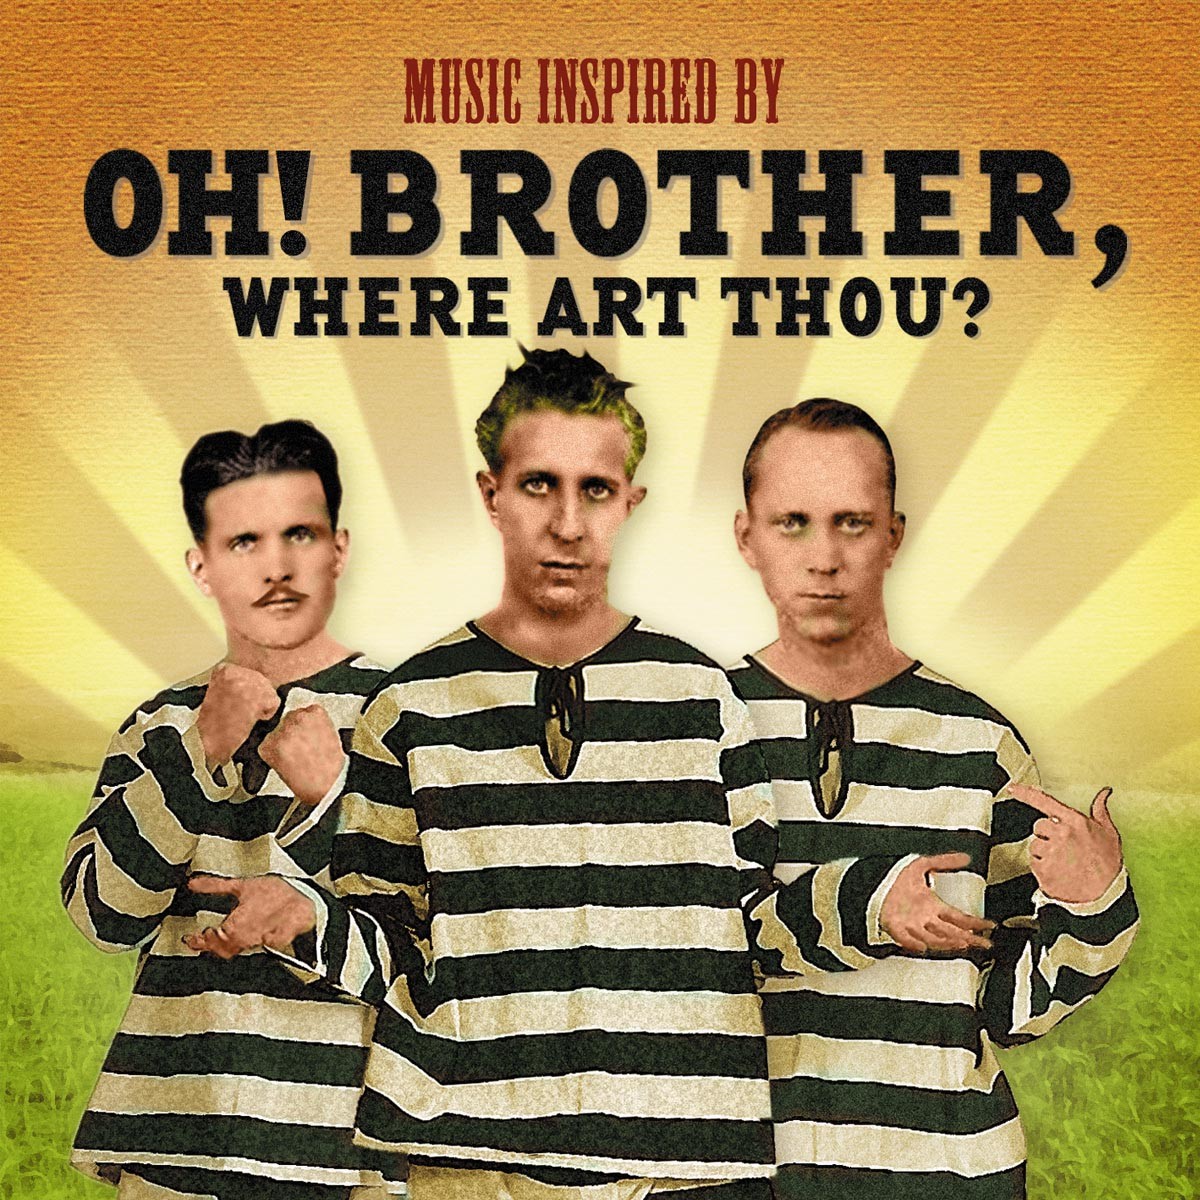 o brother where art thou full movie free no download